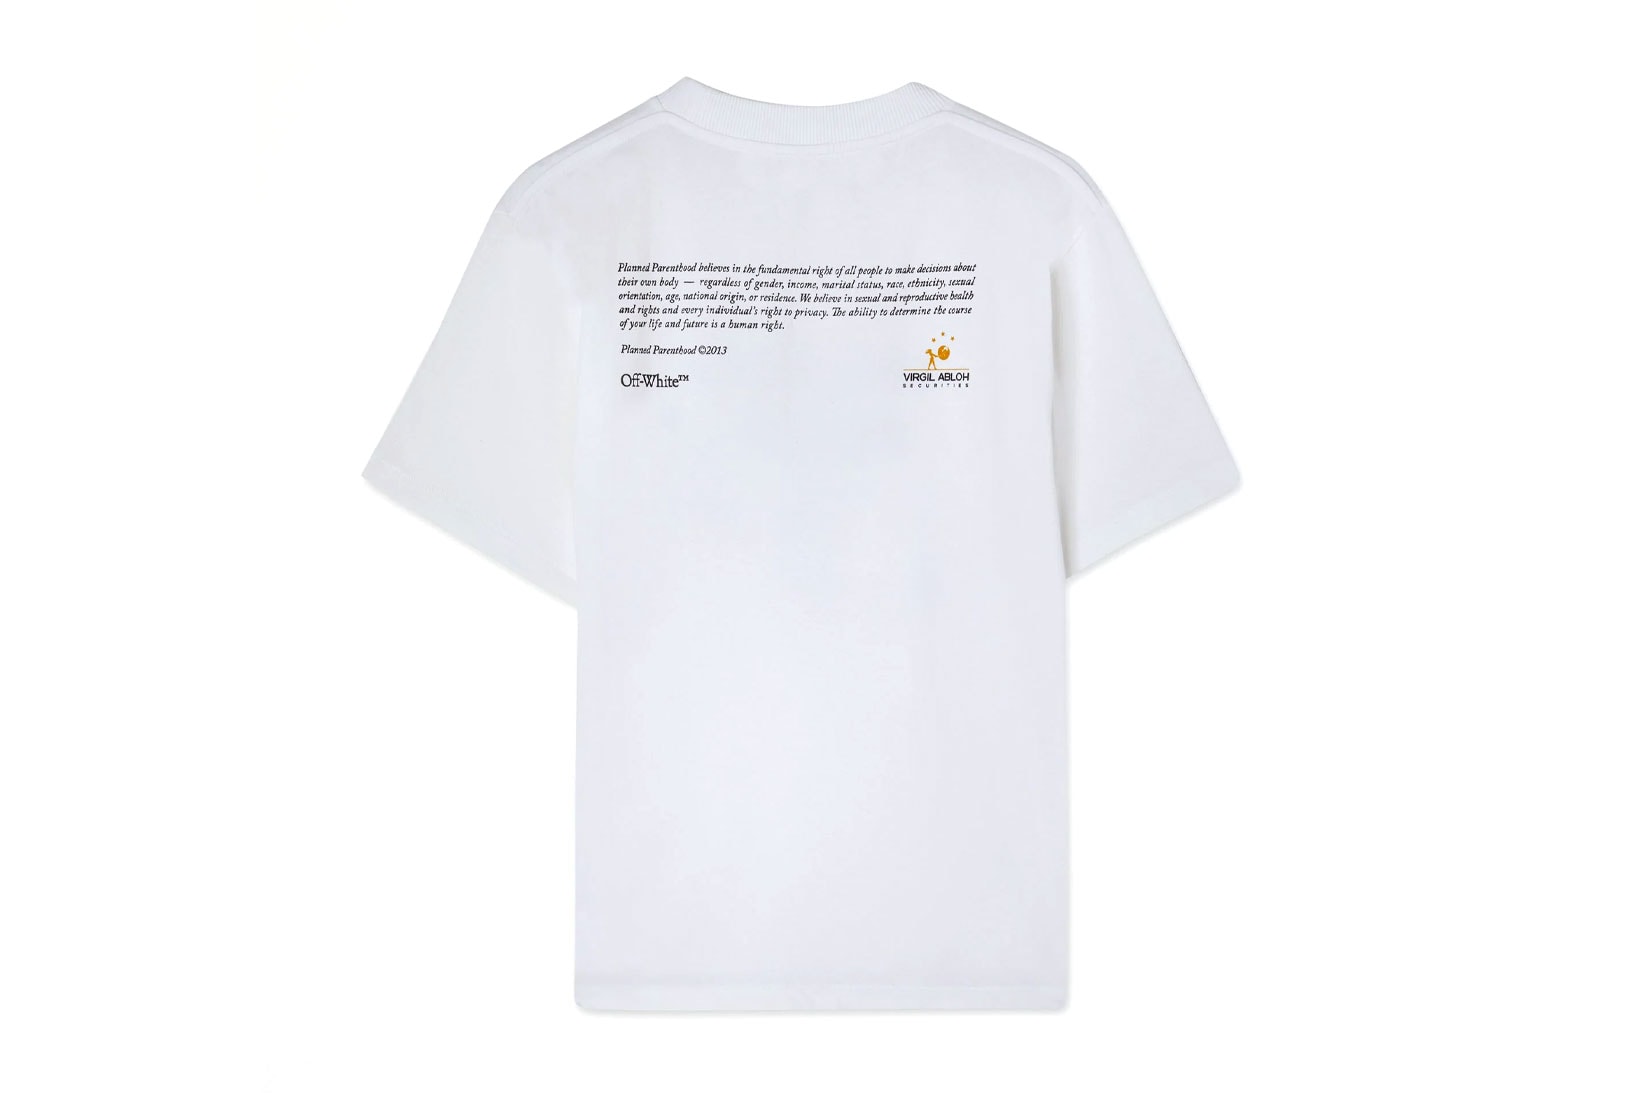 Virgil Abloh Jenny Holzer Planned Parenthood T-Shirt Re-Release Off-White INfo